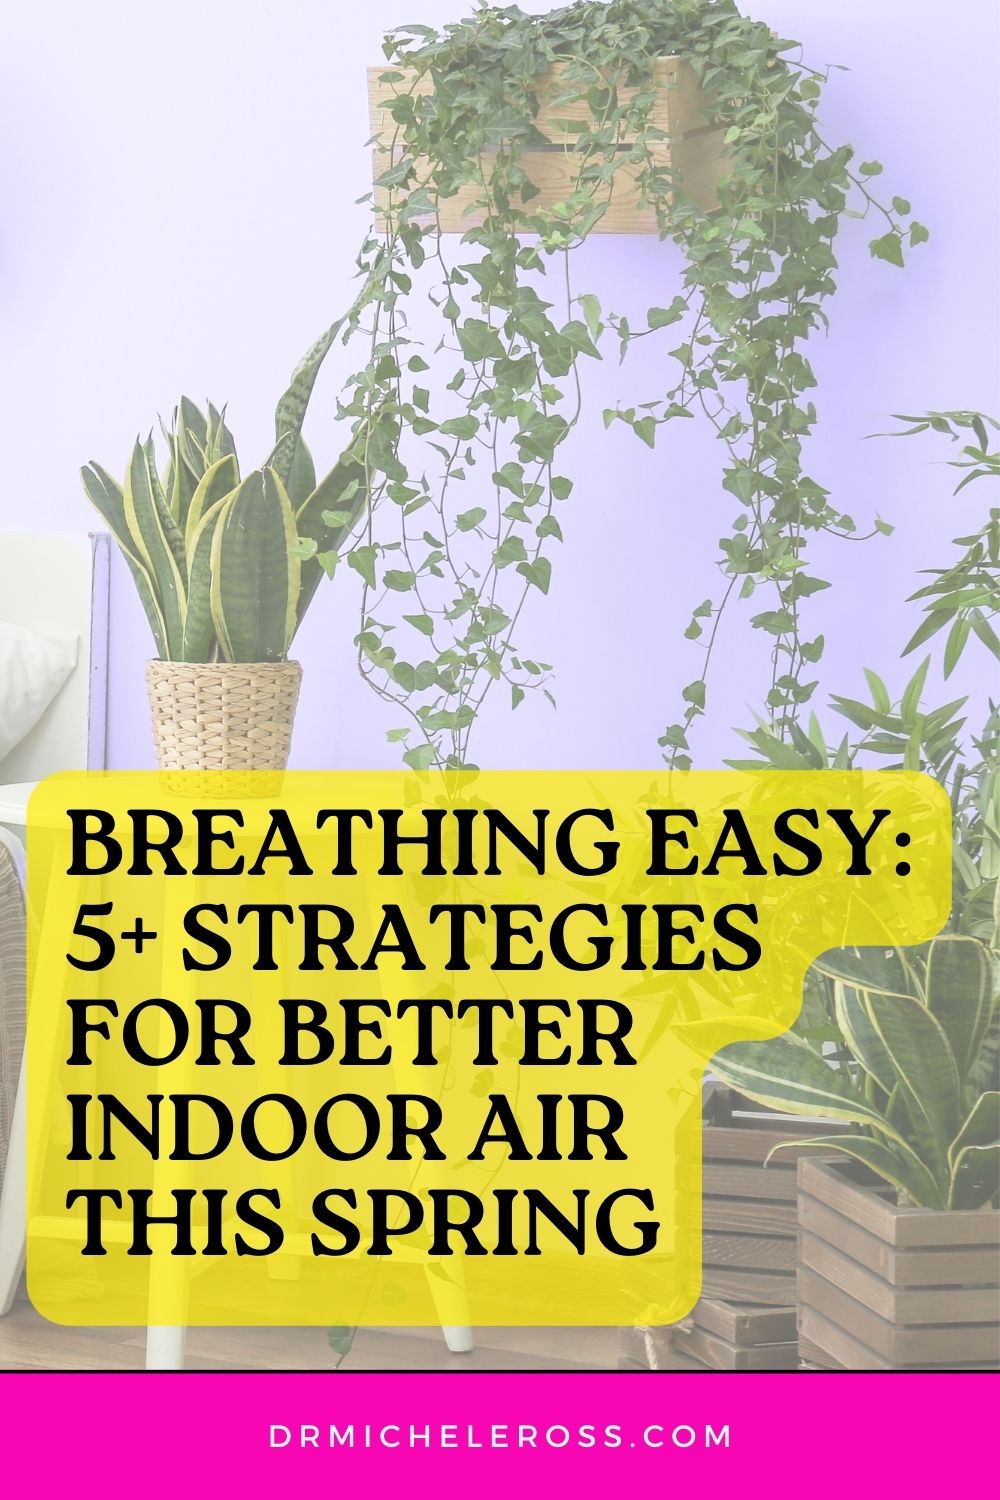 Breathing Easy - 5+ Strategies for Better Indoor Air This Spring - Pinterest Pin